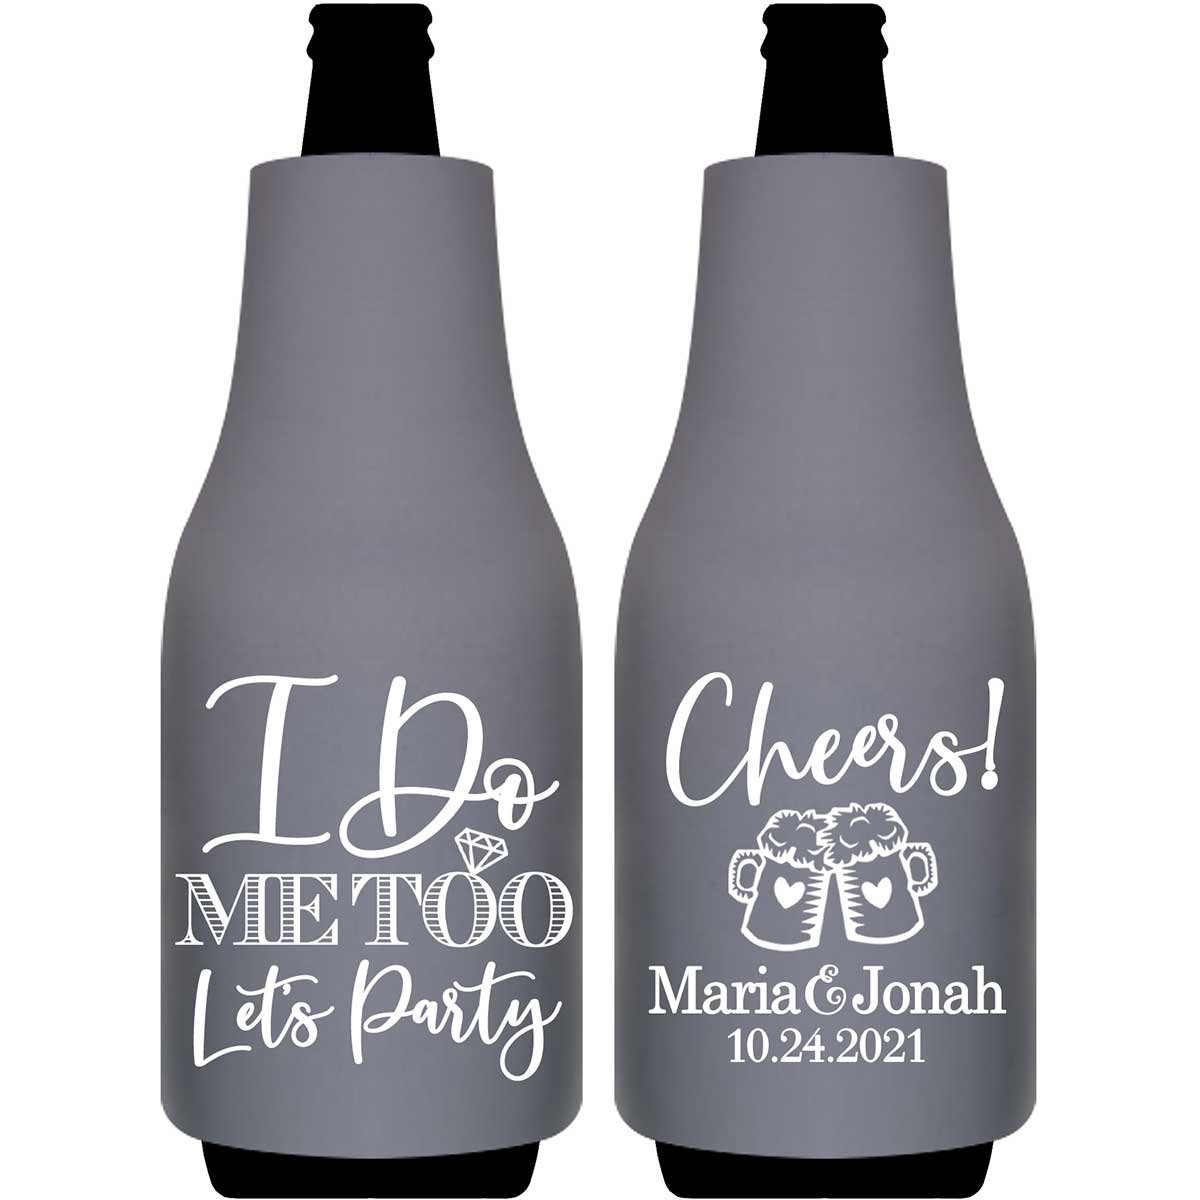 I Do Me Too Let's Party 1B Cheers Foldable Bottle Sleeve Koozies Wedding Gifts for Guests